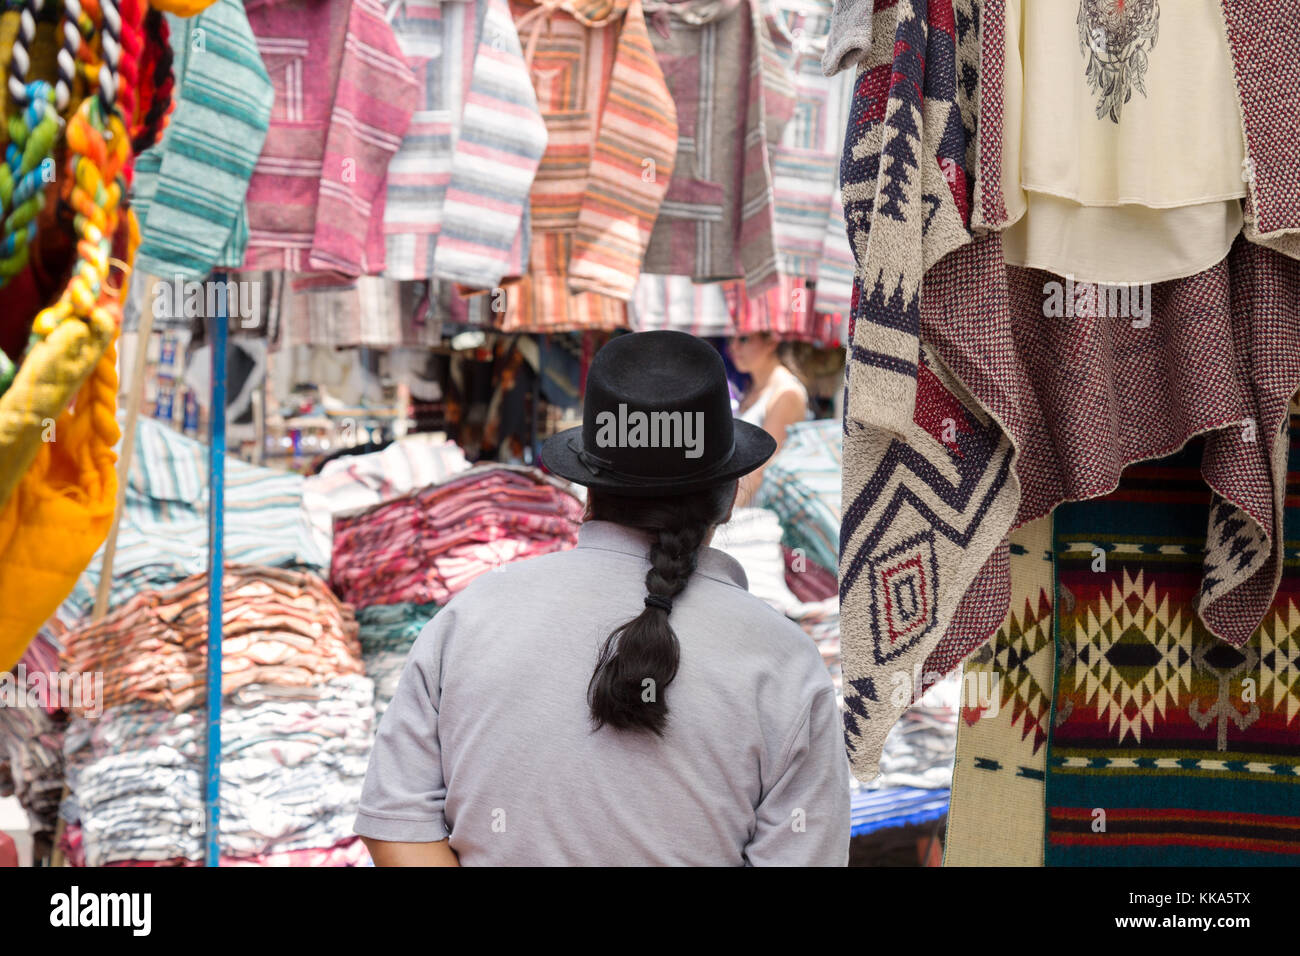 Indigenous man wearing hat and with ponytail as stall holder at a market stall, Otavalo Market, Ecuador South America Stock Photo